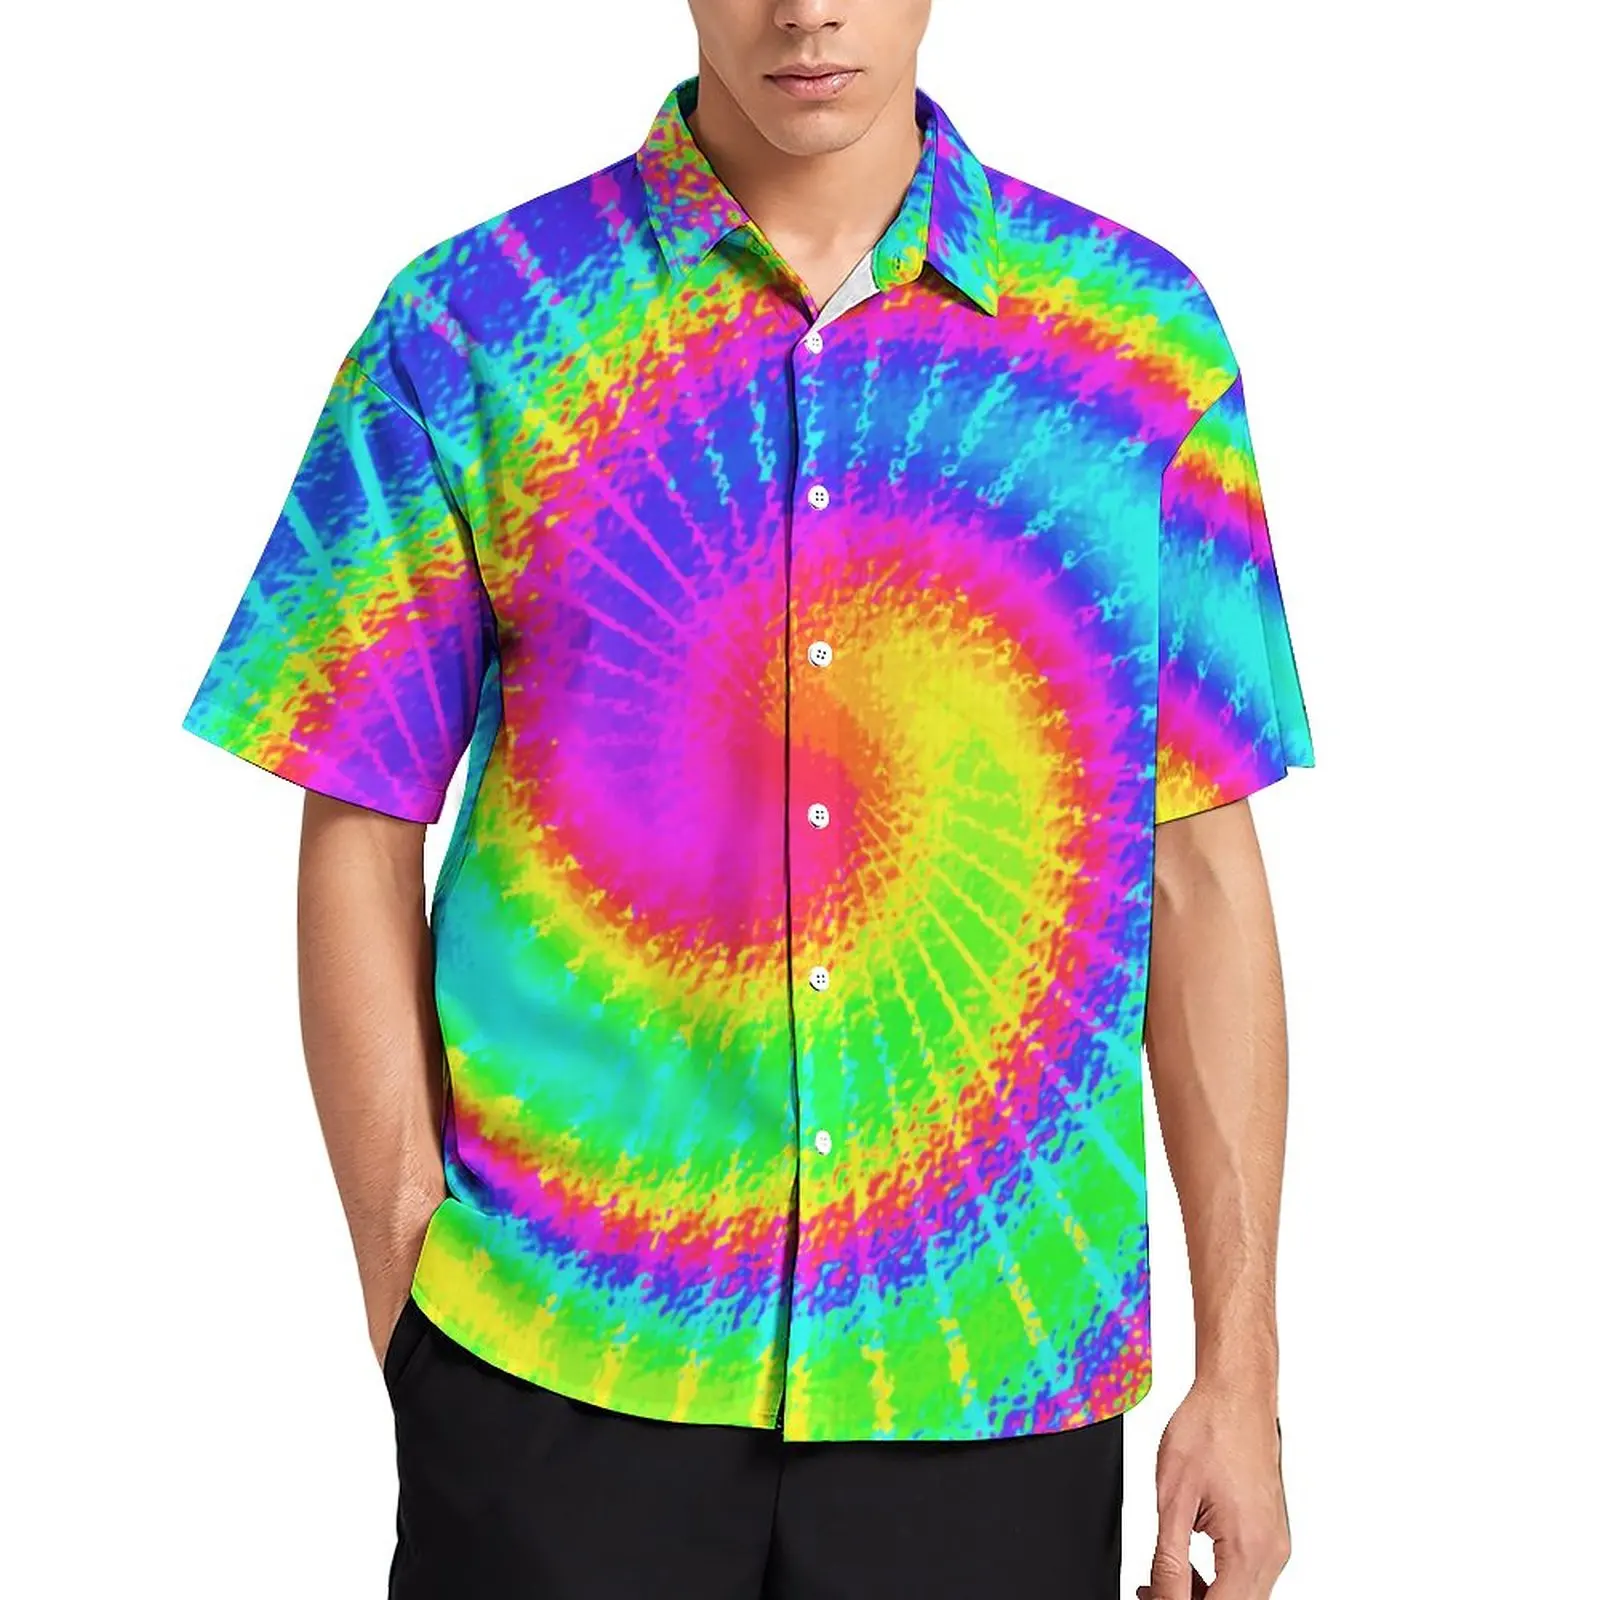 

Hippy Psychedelic Loose Shirt Male Beach Retro 70s Tie Dye Casual Shirts Hawaii Graphic Short Sleeve Trending Oversized Blouses